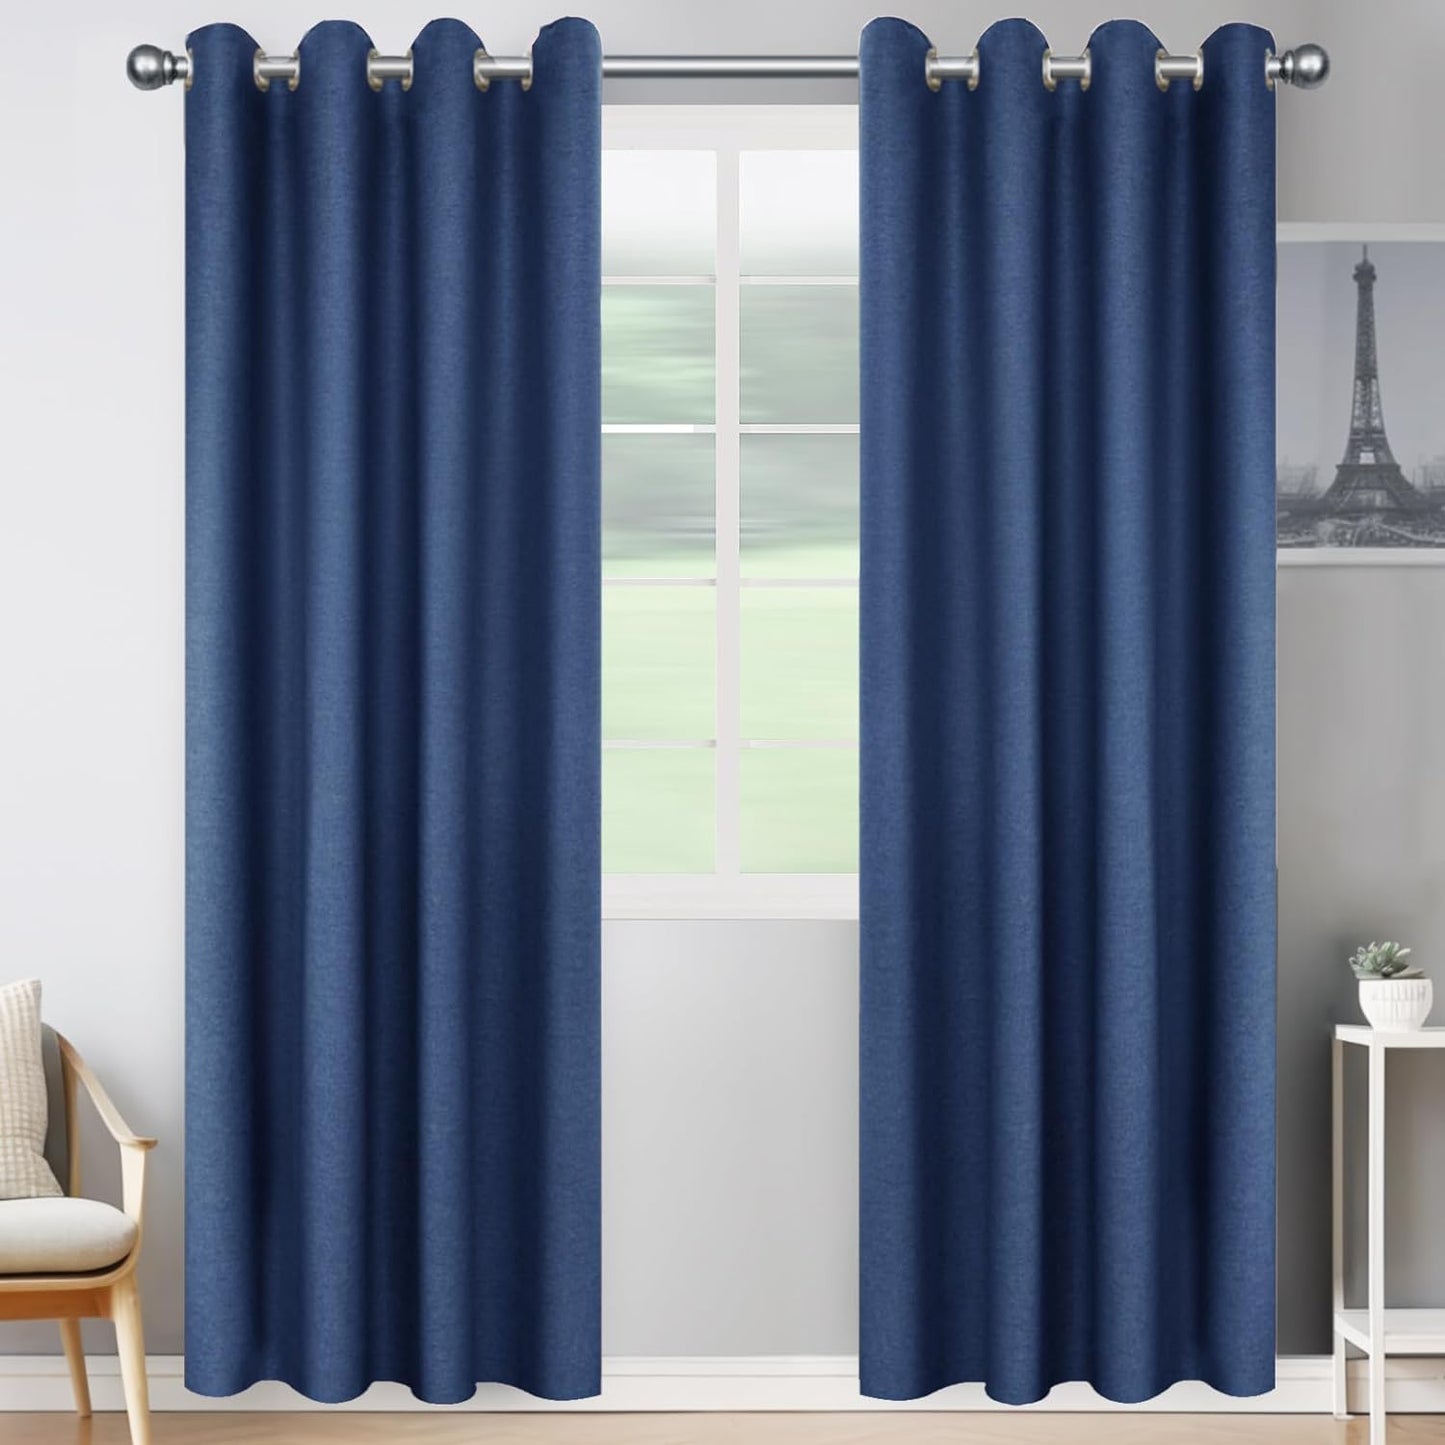 JIVINER Blackout Curtains 84 Inches Long Soundproof Thermal Insulated Curtains/Drapes/Panels for Kid'S Room (Baby Pink, W42 X L84,2 Panels)  JWN E-Commerce Linen Dark Blue W52 X L96 ,2 Panels 